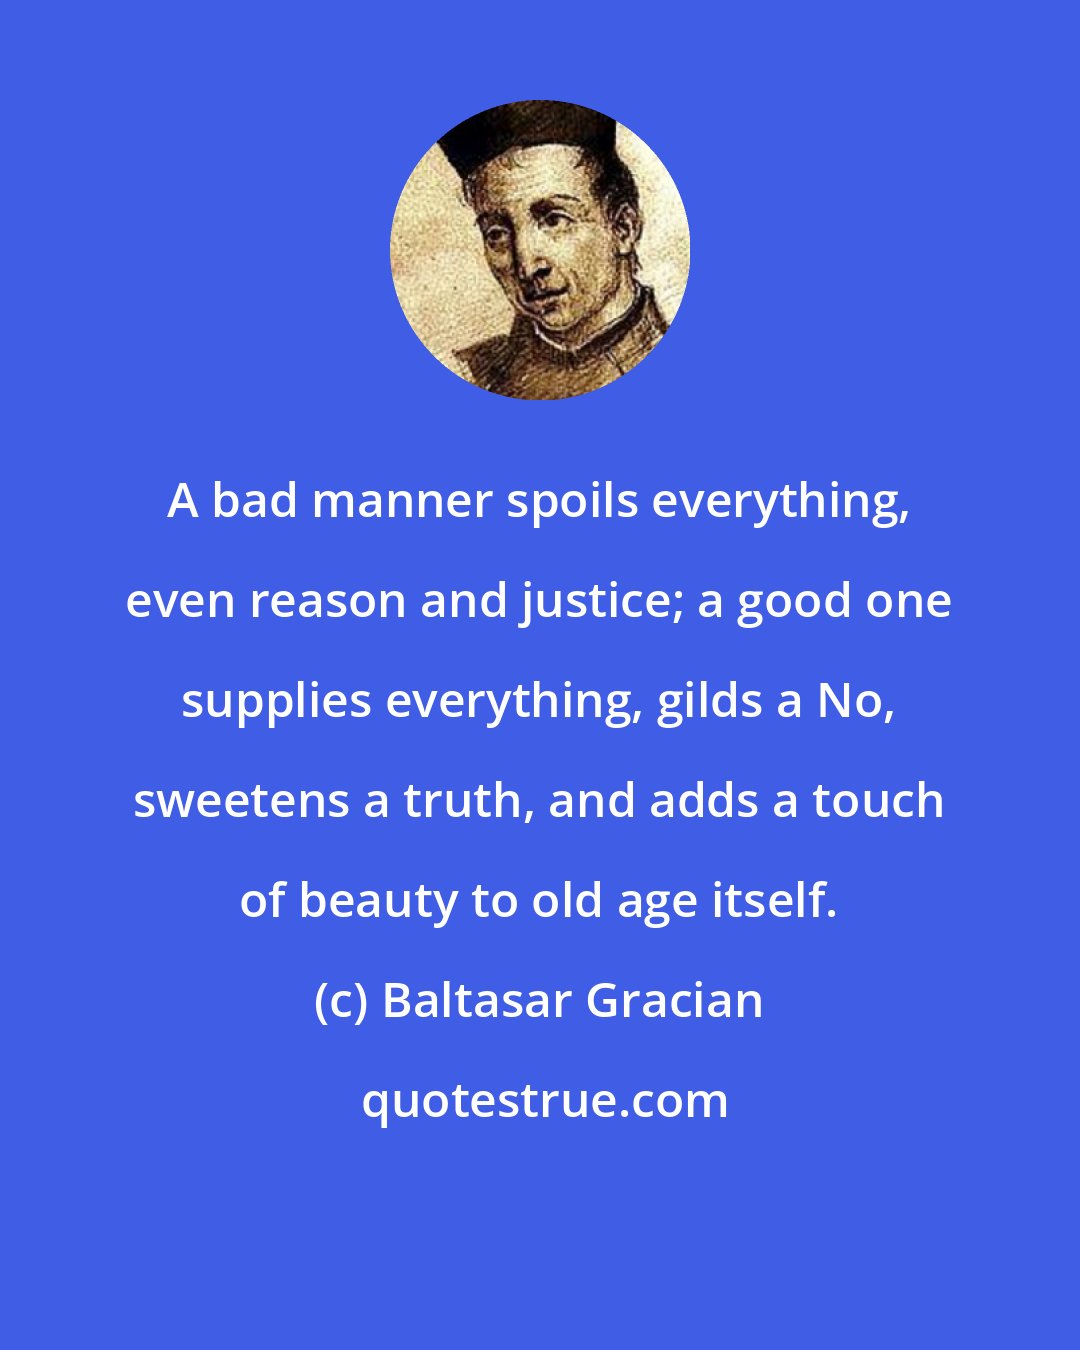 Baltasar Gracian: A bad manner spoils everything, even reason and justice; a good one supplies everything, gilds a No, sweetens a truth, and adds a touch of beauty to old age itself.